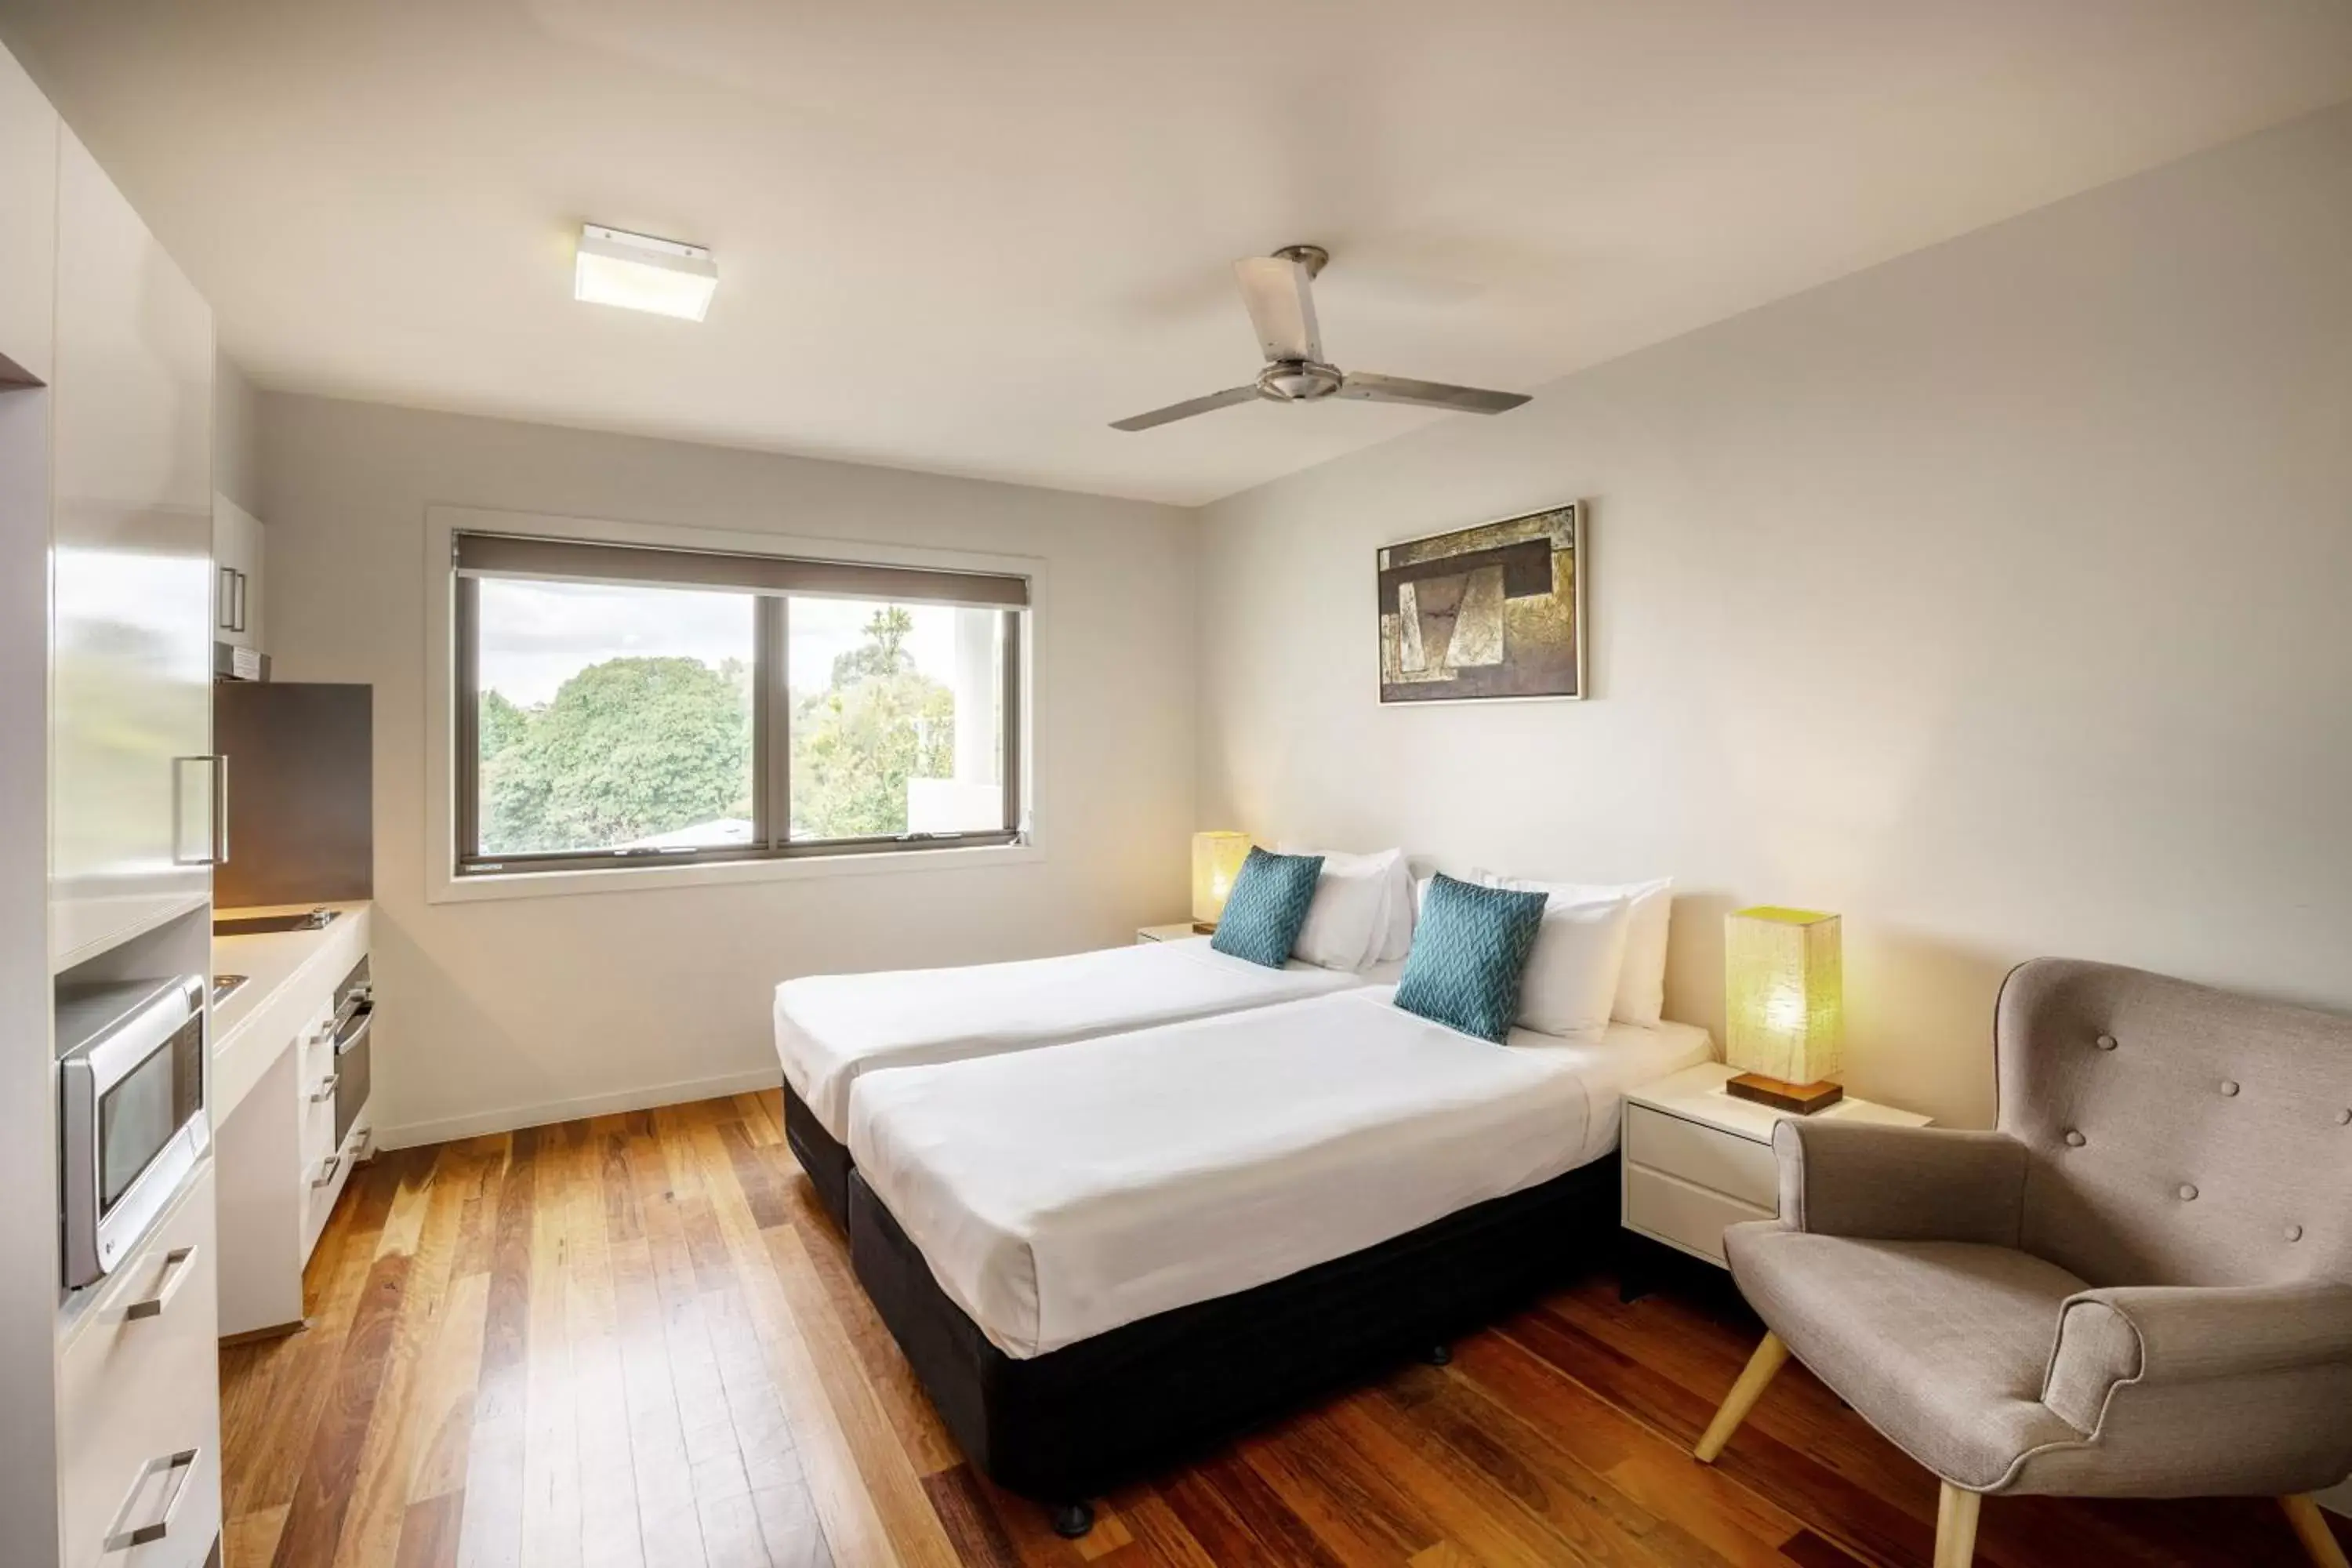 Bedroom in Essence Apartments Chermside